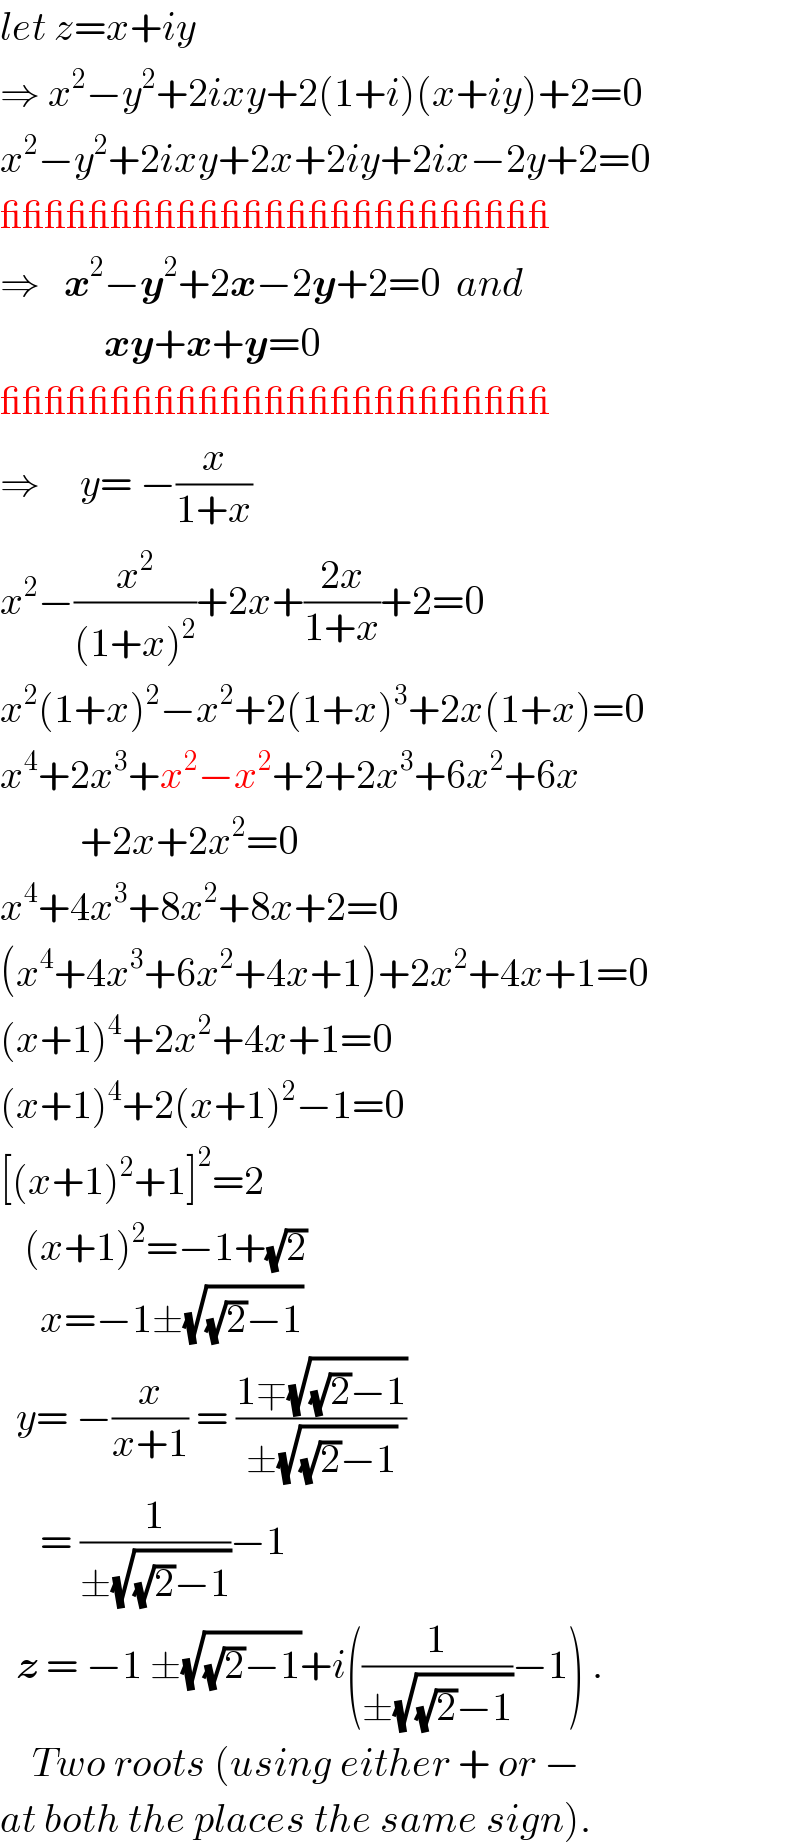 let z=x+iy  ⇒ x^2 −y^2 +2ixy+2(1+i)(x+iy)+2=0  x^2 −y^2 +2ixy+2x+2iy+2ix−2y+2=0  _________________________  ⇒   x^2 −y^2 +2x−2y+2=0  and               xy+x+y=0  _________________________  ⇒     y= −(x/(1+x))  x^2 −(x^2 /((1+x)^2 ))+2x+((2x)/(1+x))+2=0  x^2 (1+x)^2 −x^2 +2(1+x)^3 +2x(1+x)=0  x^4 +2x^3 +x^2 −x^2 +2+2x^3 +6x^2 +6x            +2x+2x^2 =0  x^4 +4x^3 +8x^2 +8x+2=0  (x^4 +4x^3 +6x^2 +4x+1)+2x^2 +4x+1=0  (x+1)^4 +2x^2 +4x+1=0  (x+1)^4 +2(x+1)^2 −1=0  [(x+1)^2 +1]^2 =2     (x+1)^2 =−1+(√2)       x=−1±(√((√2)−1))    y= −(x/(x+1)) = ((1∓(√((√2)−1)))/(±(√((√2)−1))))       = (1/(±(√((√2)−1))))−1    z = −1 ±(√((√2)−1))+i((1/(±(√((√2)−1))))−1) .      Two roots (using either + or −  at both the places the same sign).  